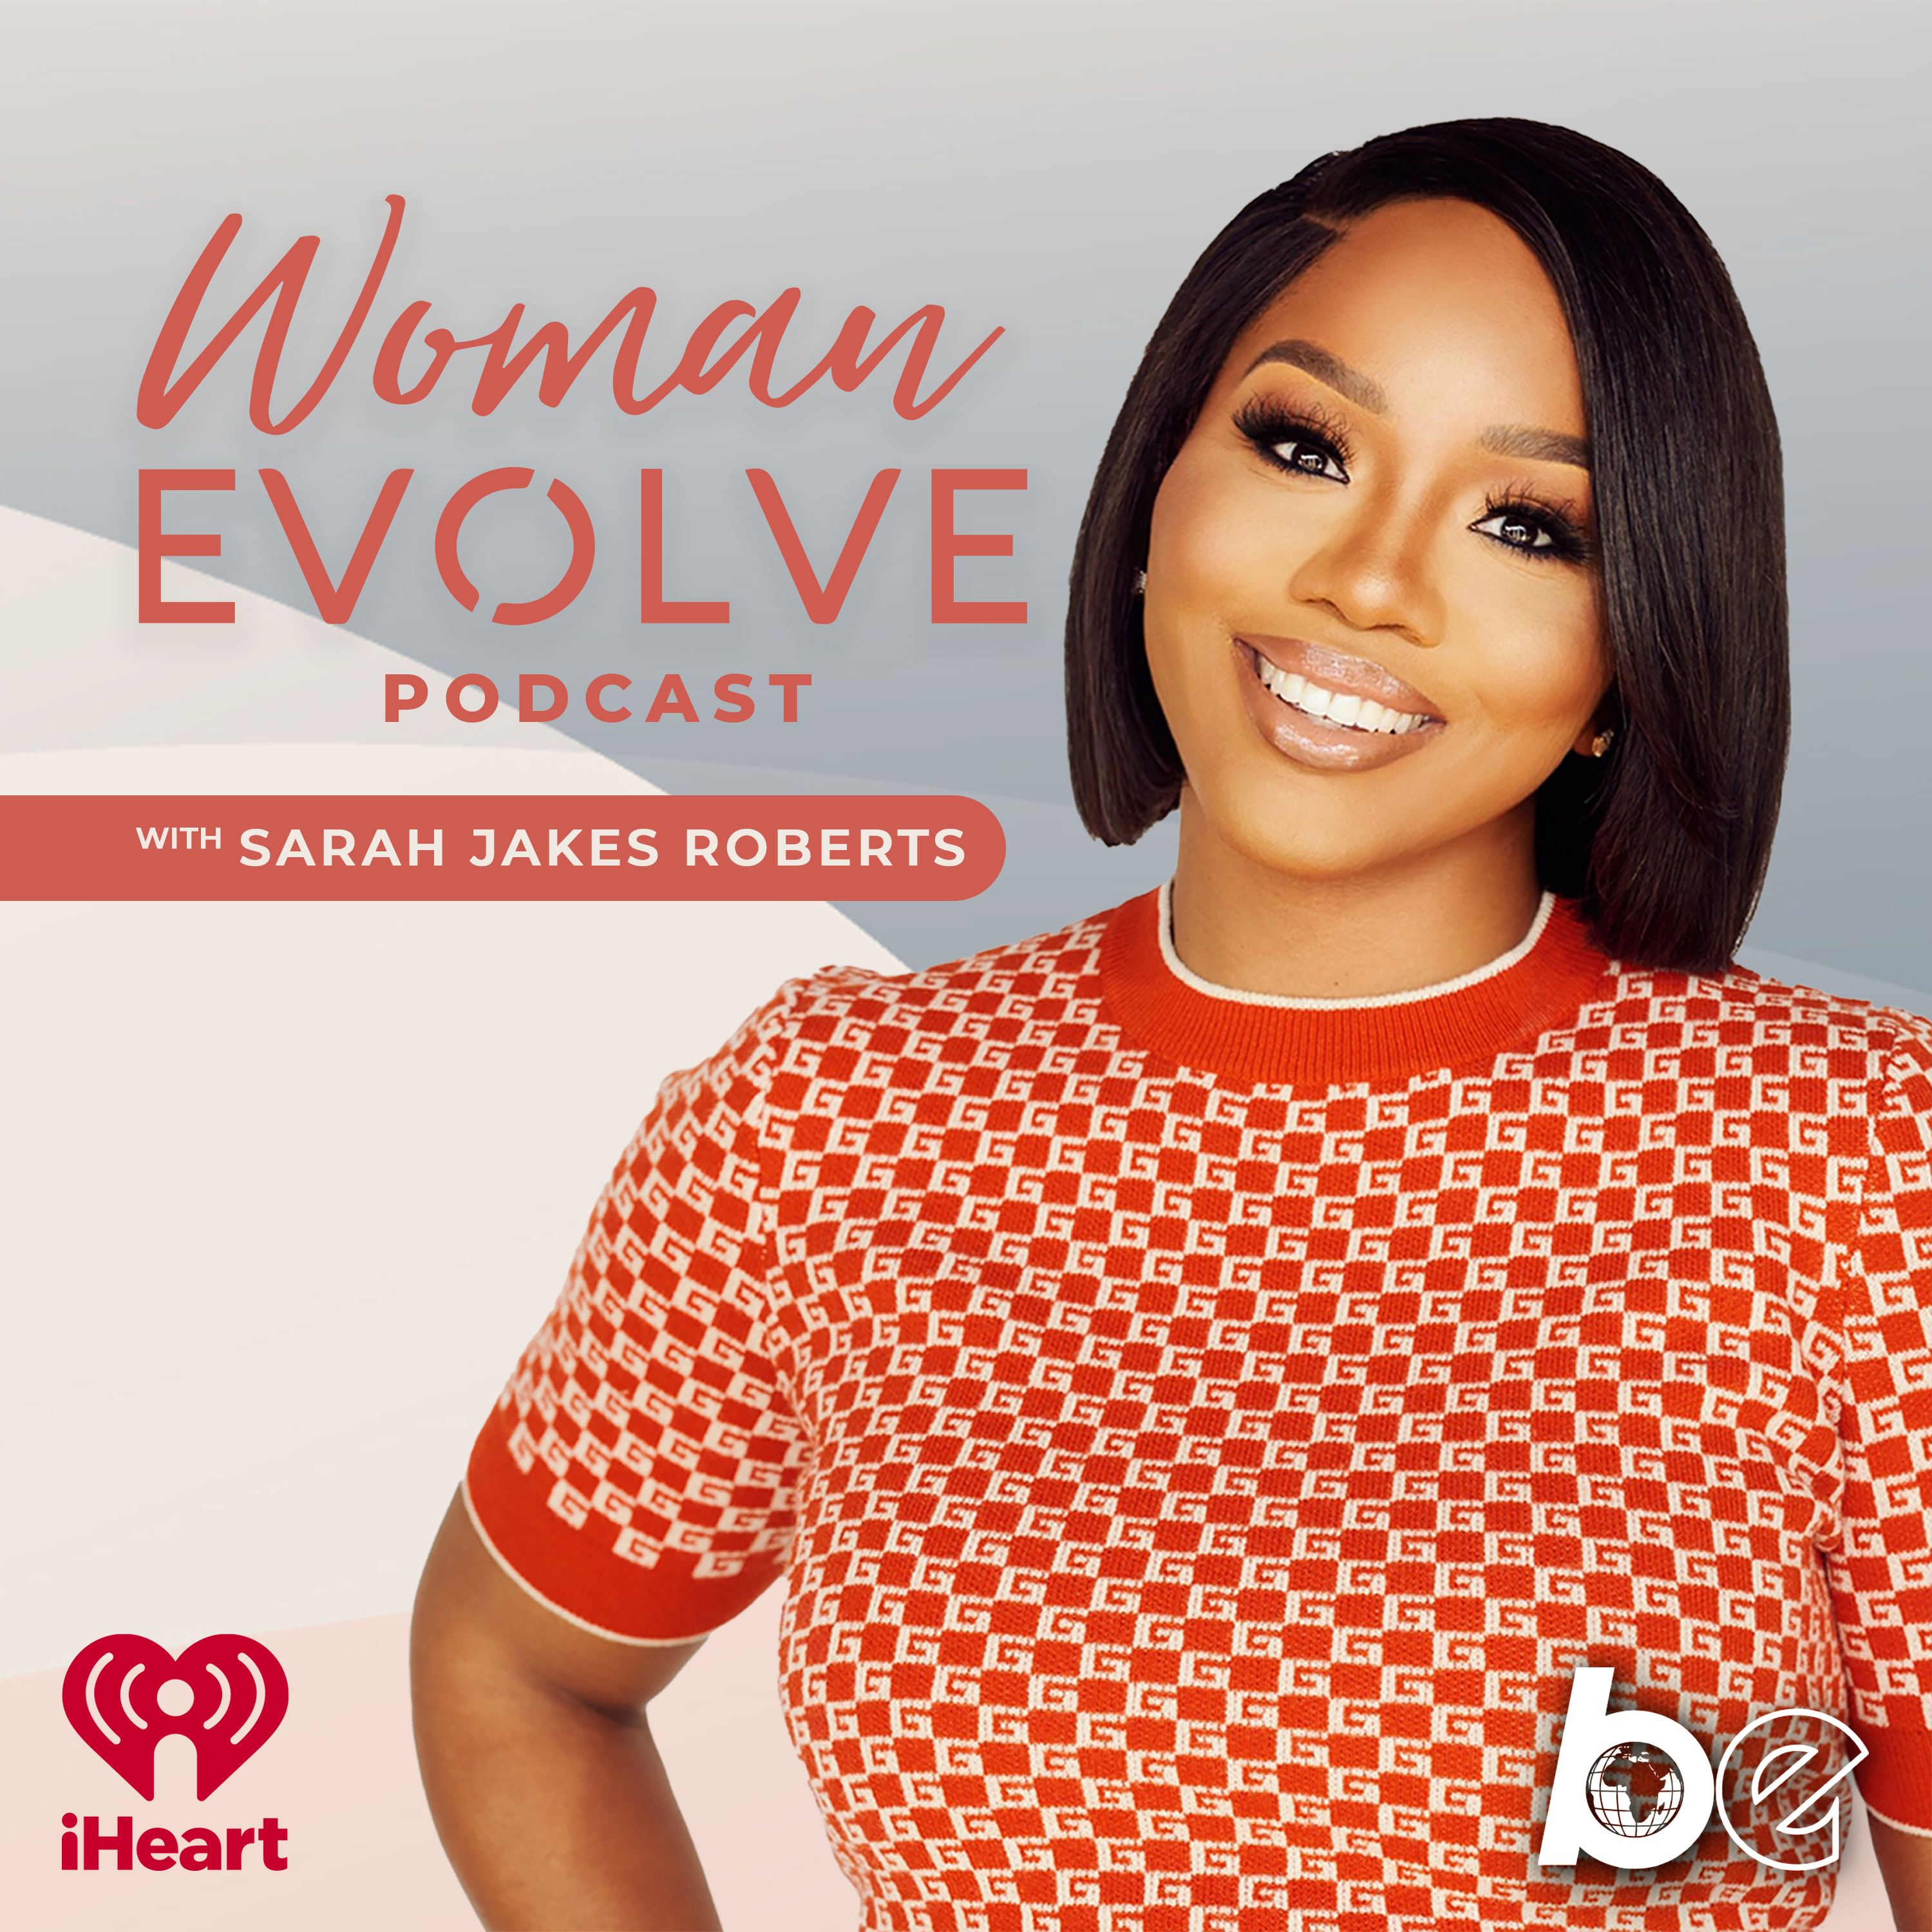 Woman Evolve with Sarah Jakes Roberts podcast show image